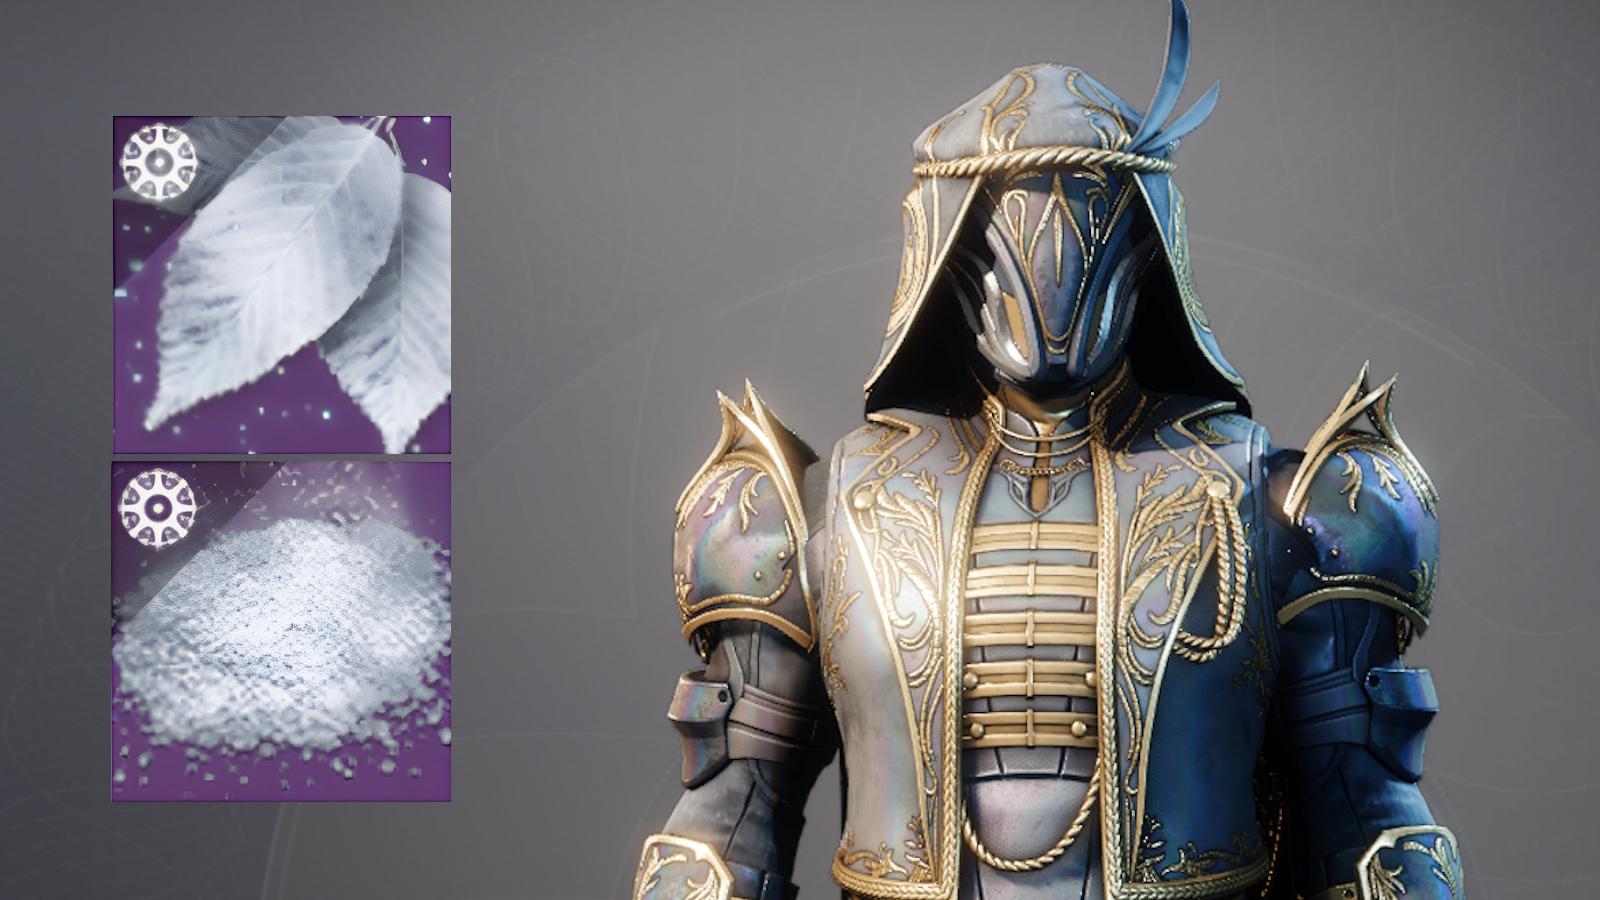 Sunlit Armor from Destiny 2 with Silver Leaves and Silver Ash on left side.